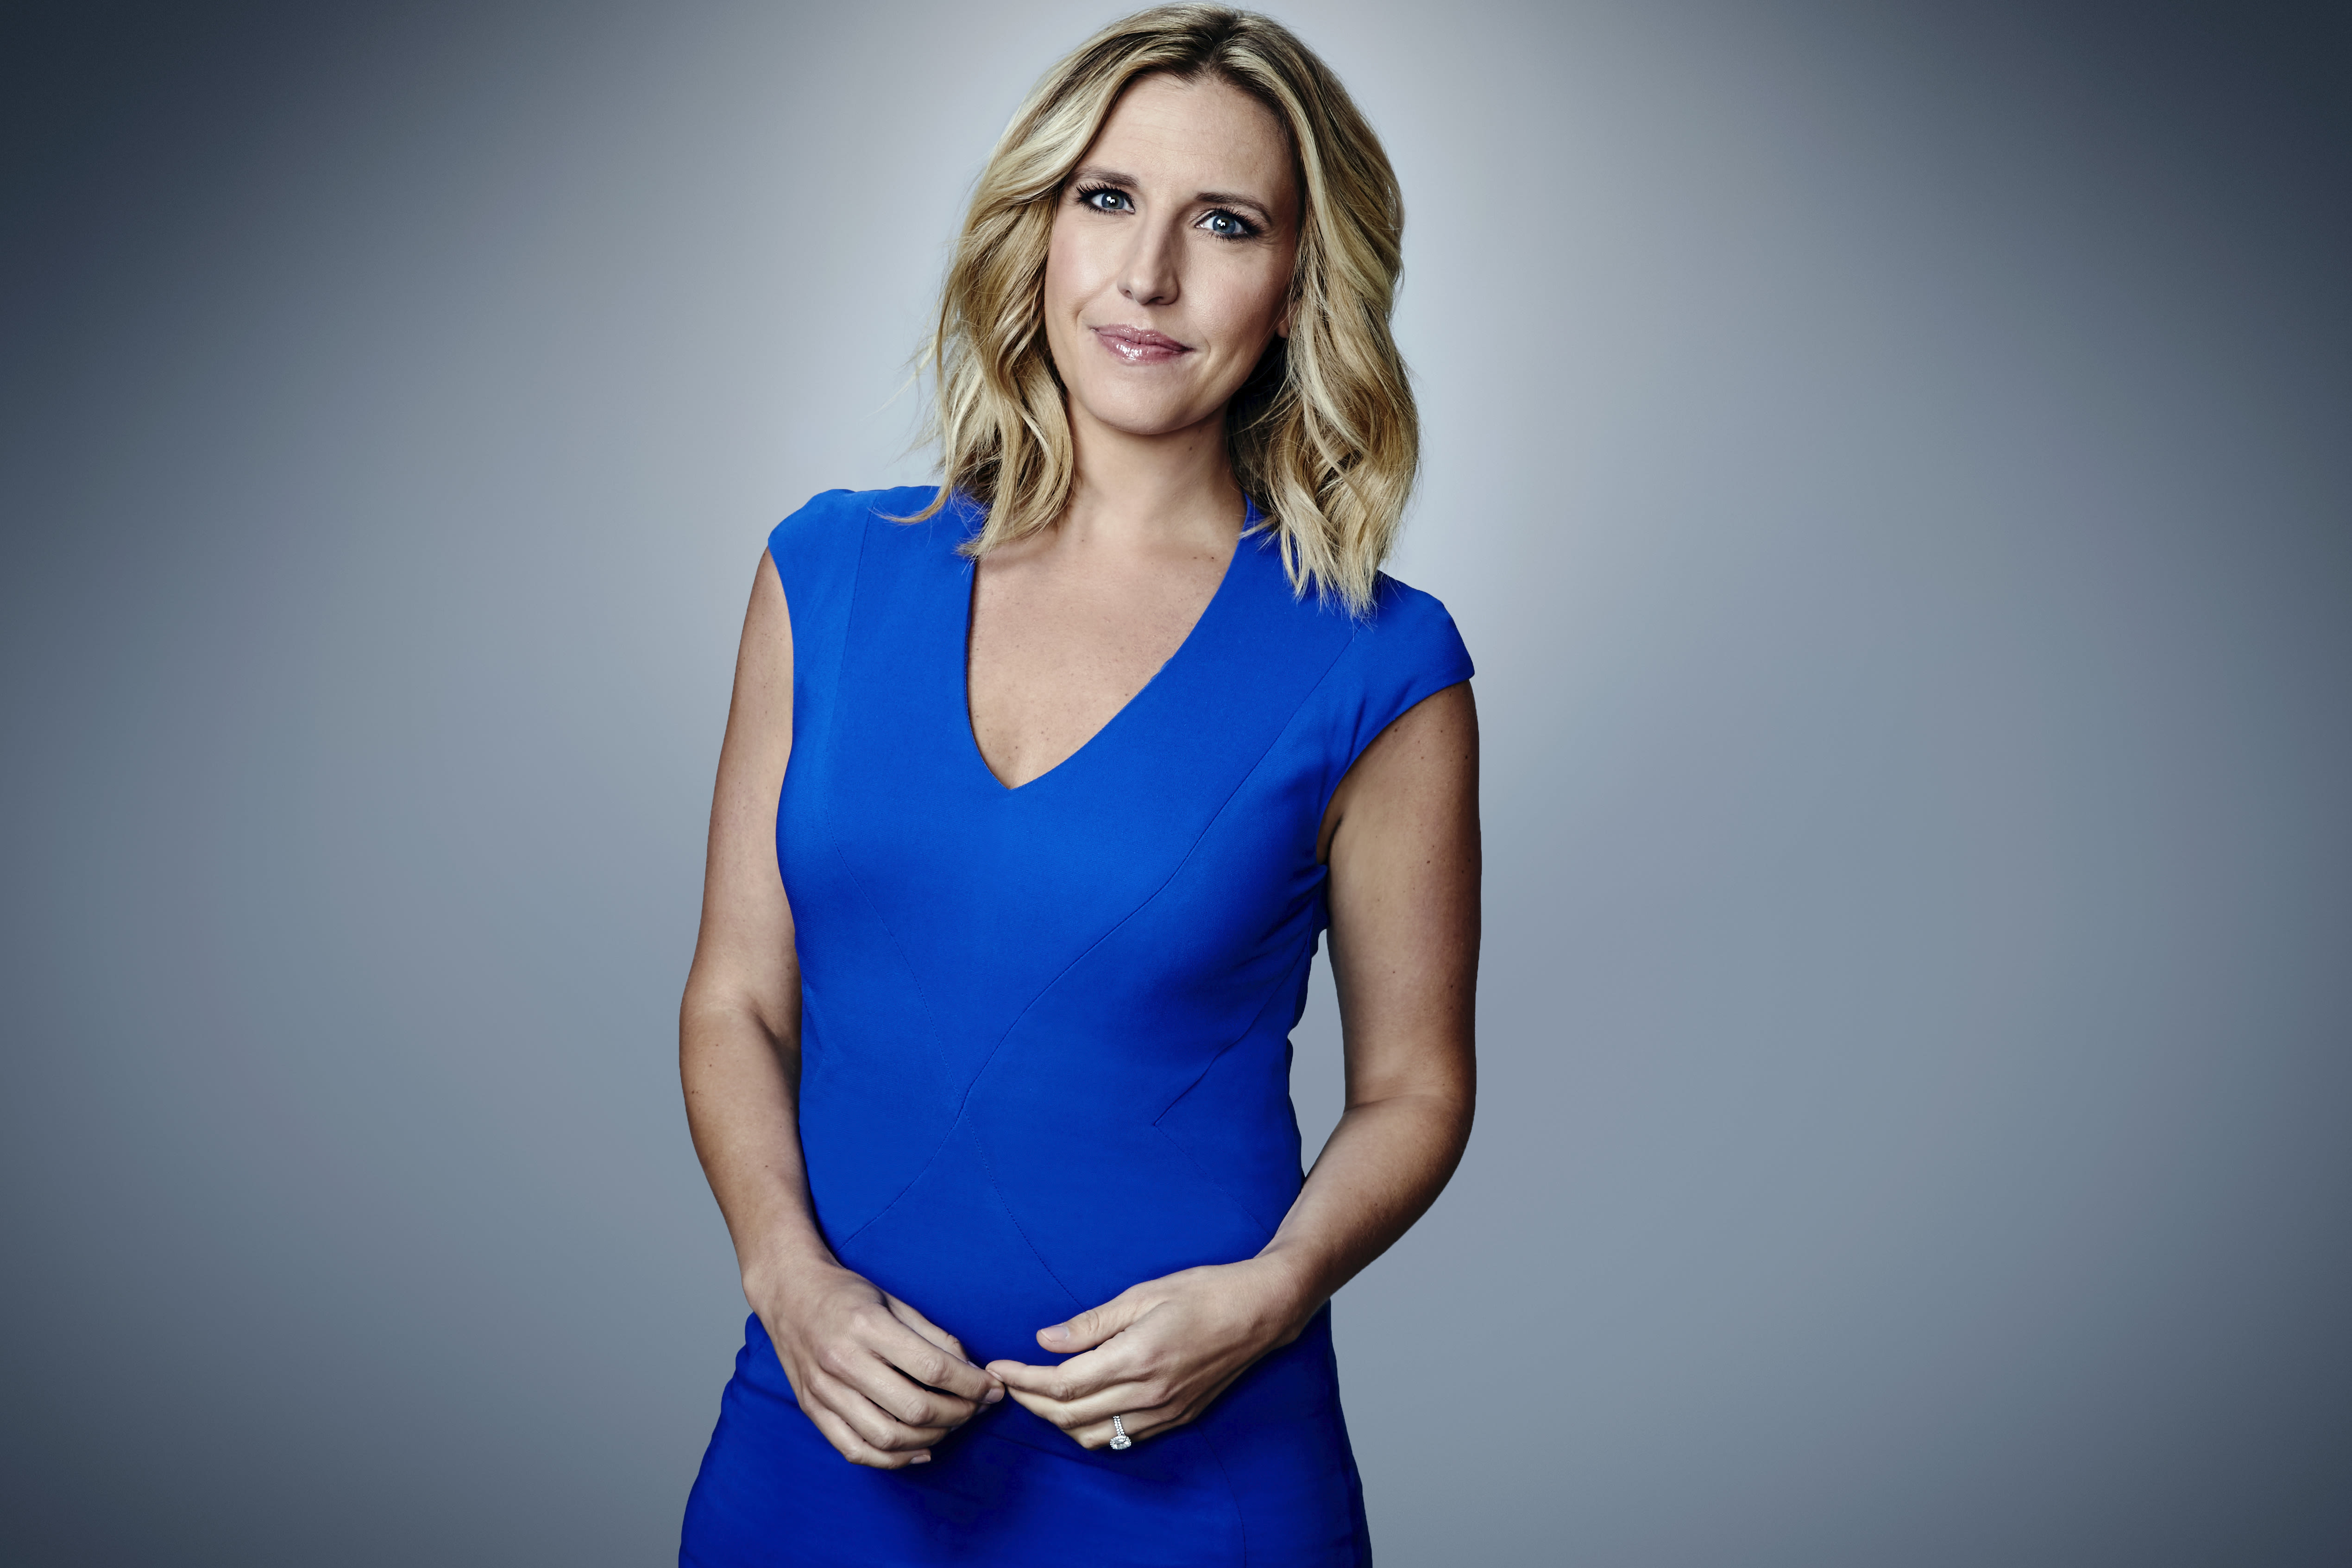 CNN journalist and host Poppy Harlow exits after 16-year run